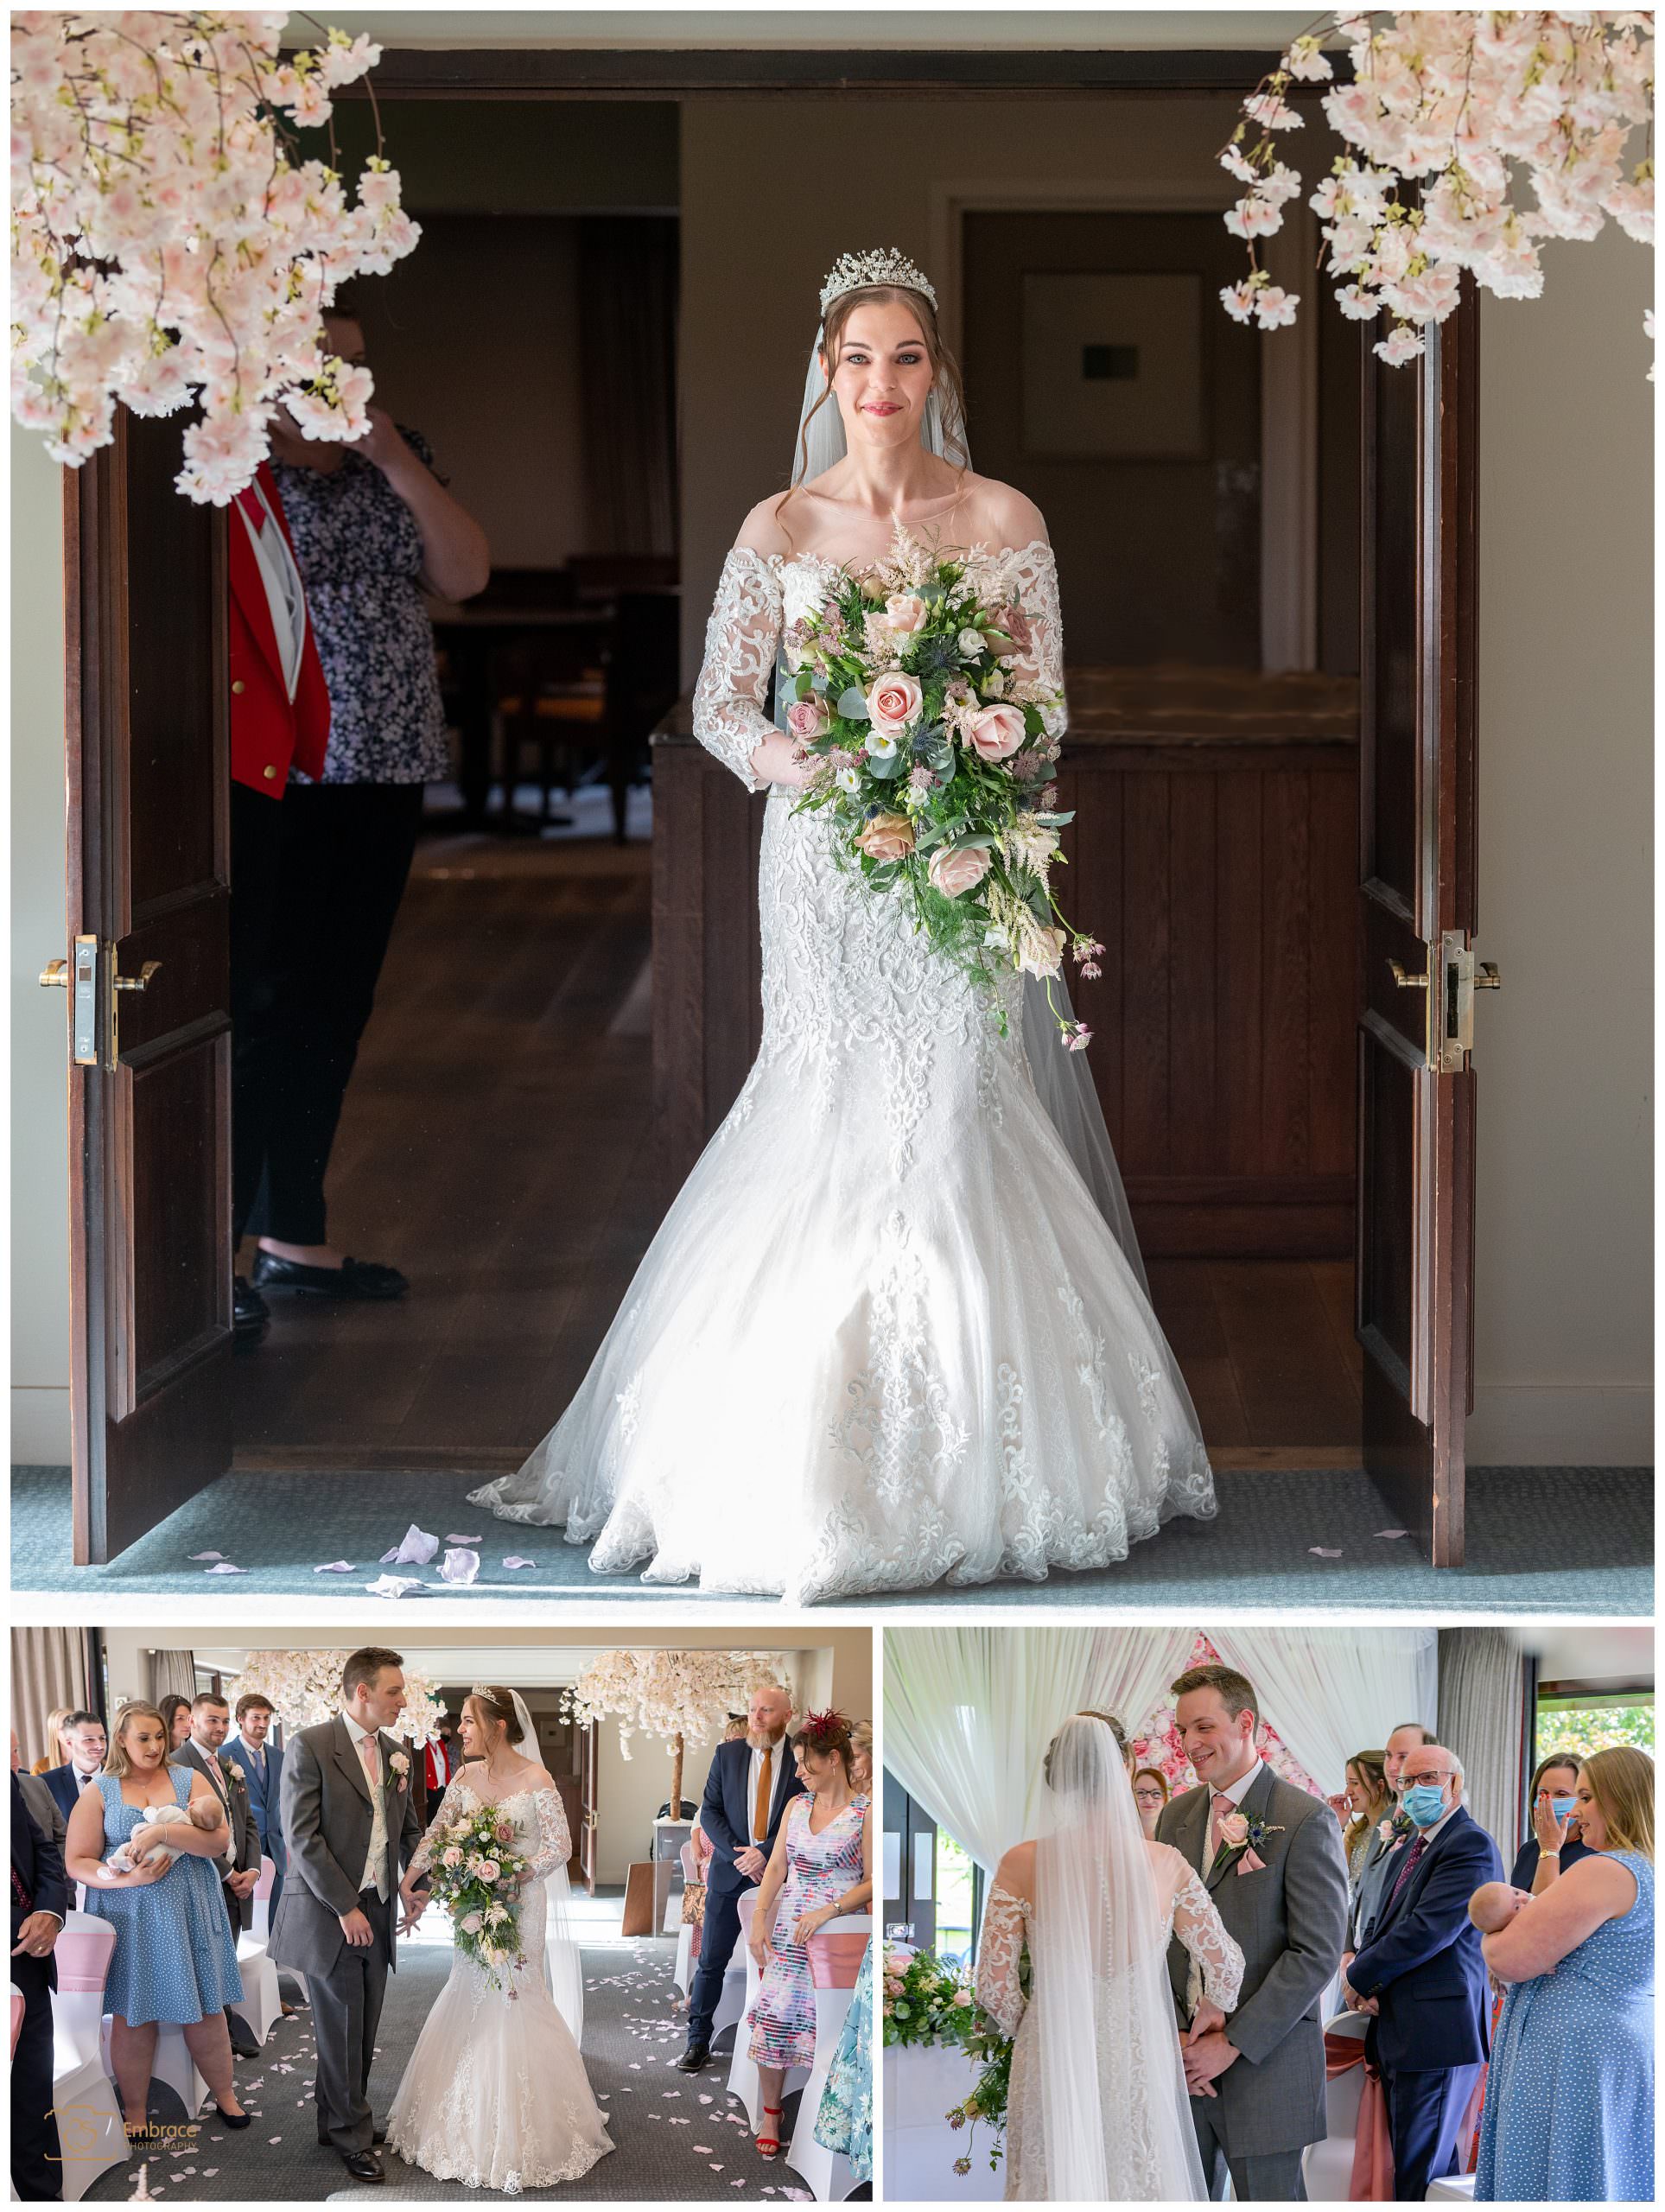 Bride entering the ceremony room with big bouquet of wedding flowers